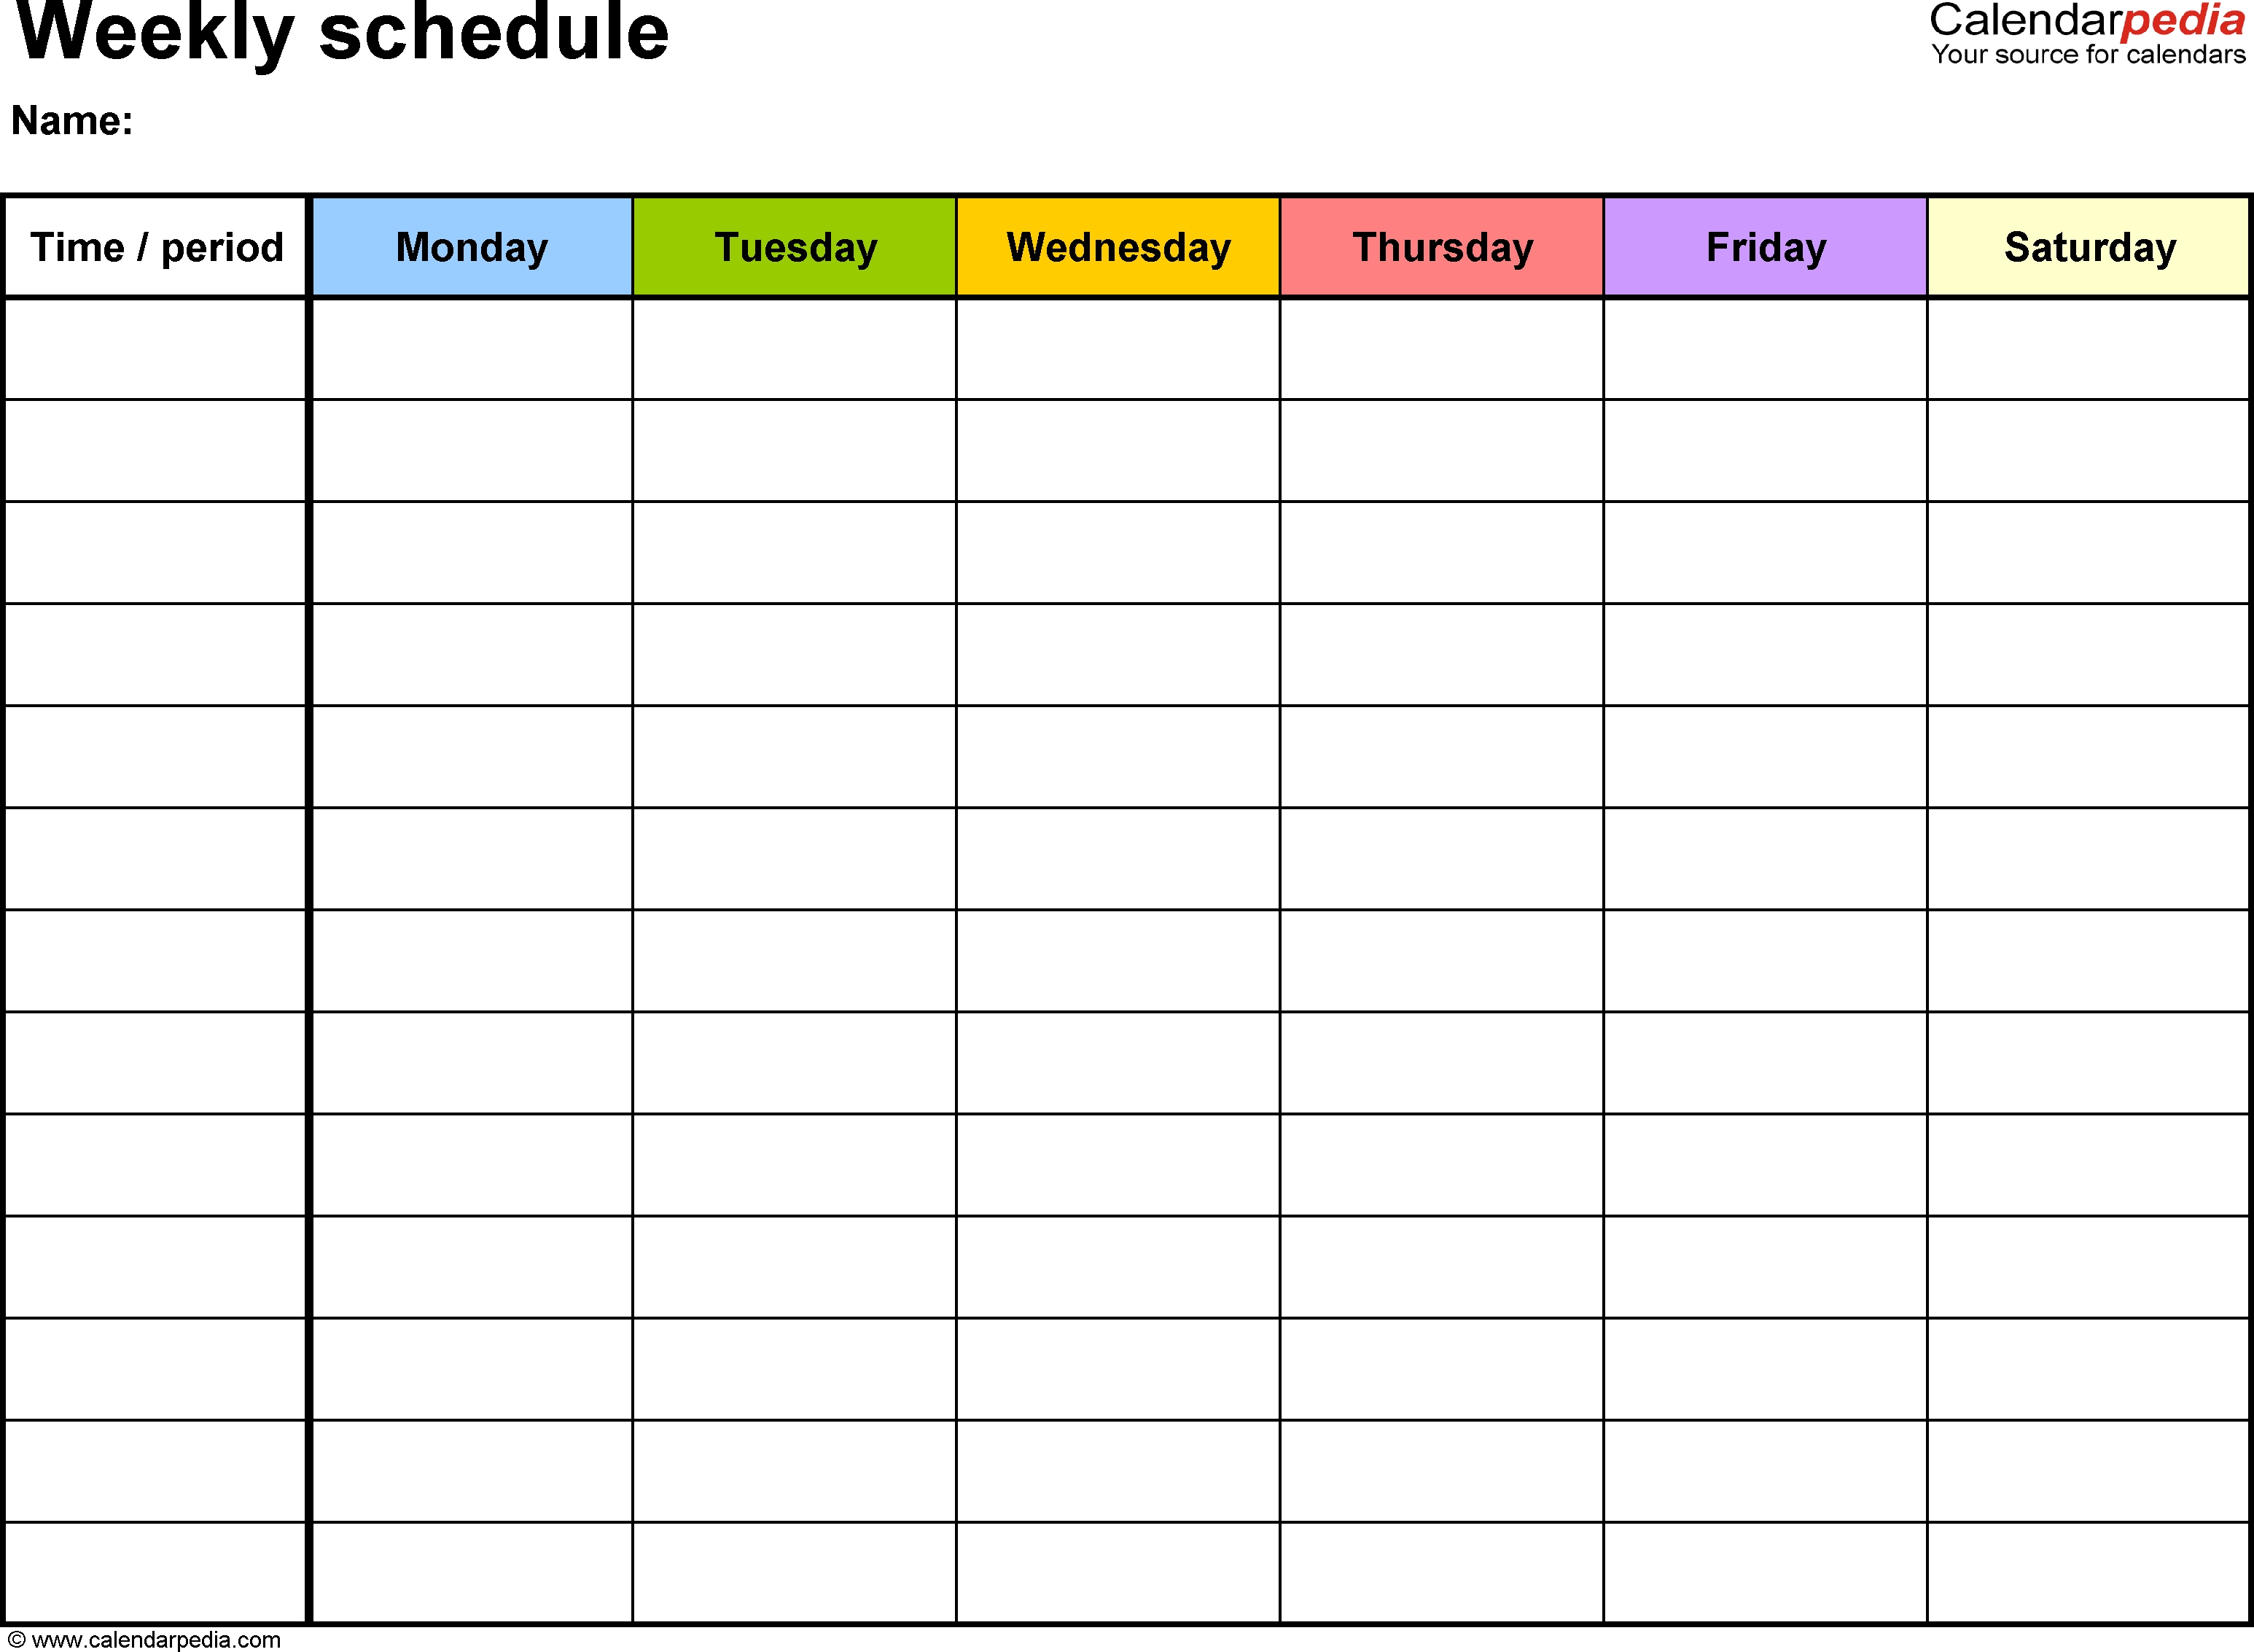 Free Weekly Schedule Templates For Word - 18 Templates with regard to Free Monday Through Friday Calendar Template